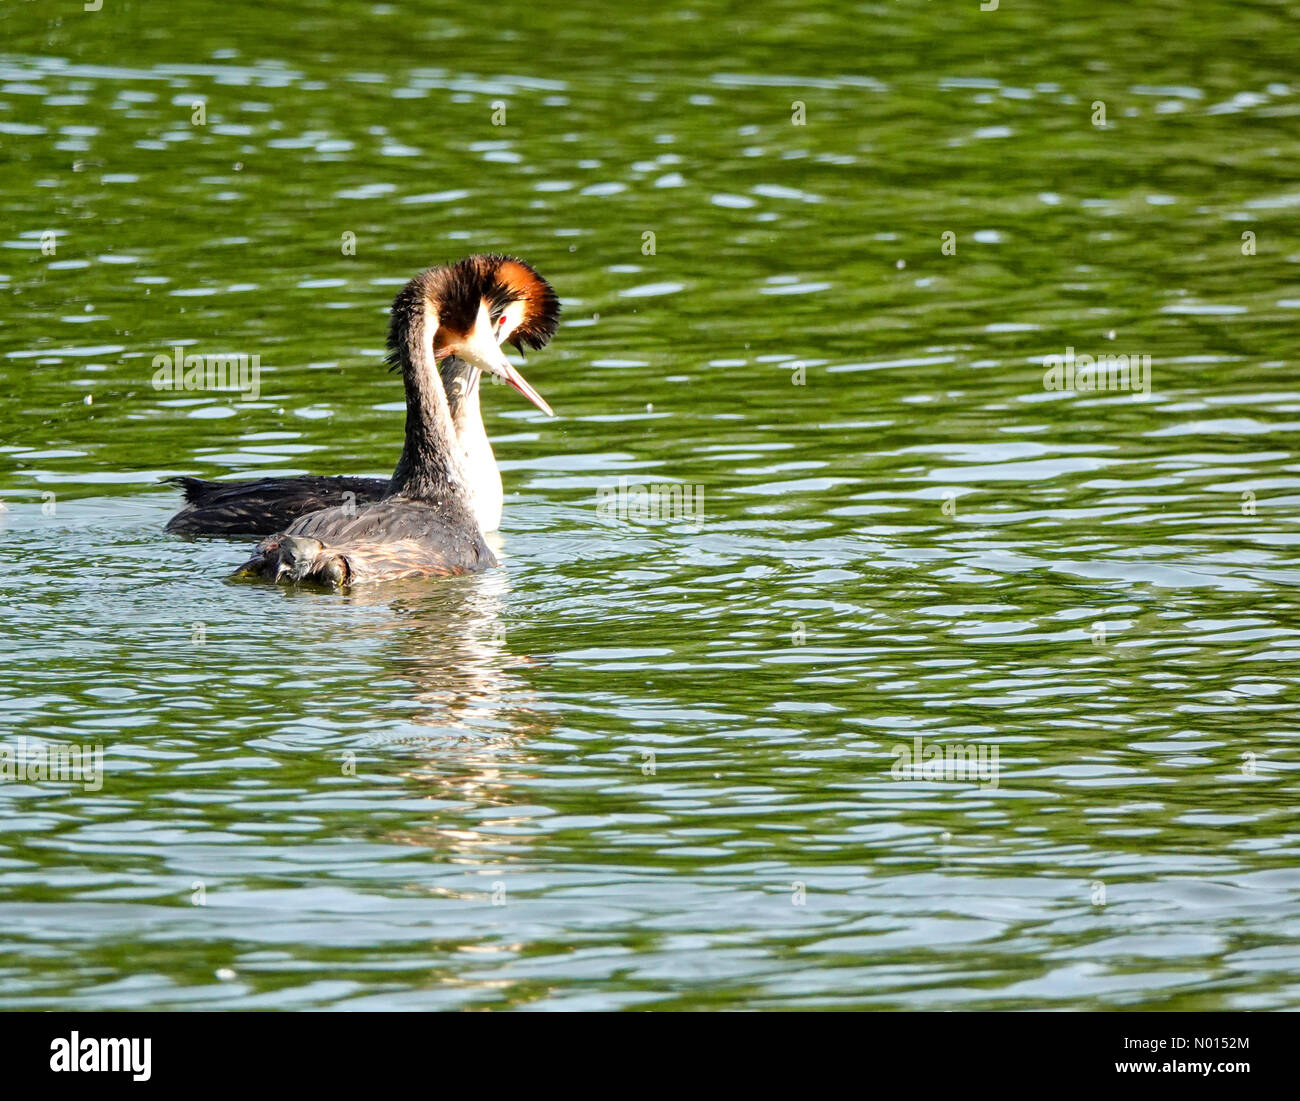 Godalming, Surrey. 12th June 2021. UK Weather: Sunny intervals in Godalming. Broadwater Lake, Godalming. 12th June 2021. Sunny intervals across the Home Counties this morning. A pair of great crested grebes in Godalming in Surrey. Credit: jamesjagger/StockimoNews/Alamy Live News Credit: jamesjagger / StockimoNews/Alamy Live News Stock Photo